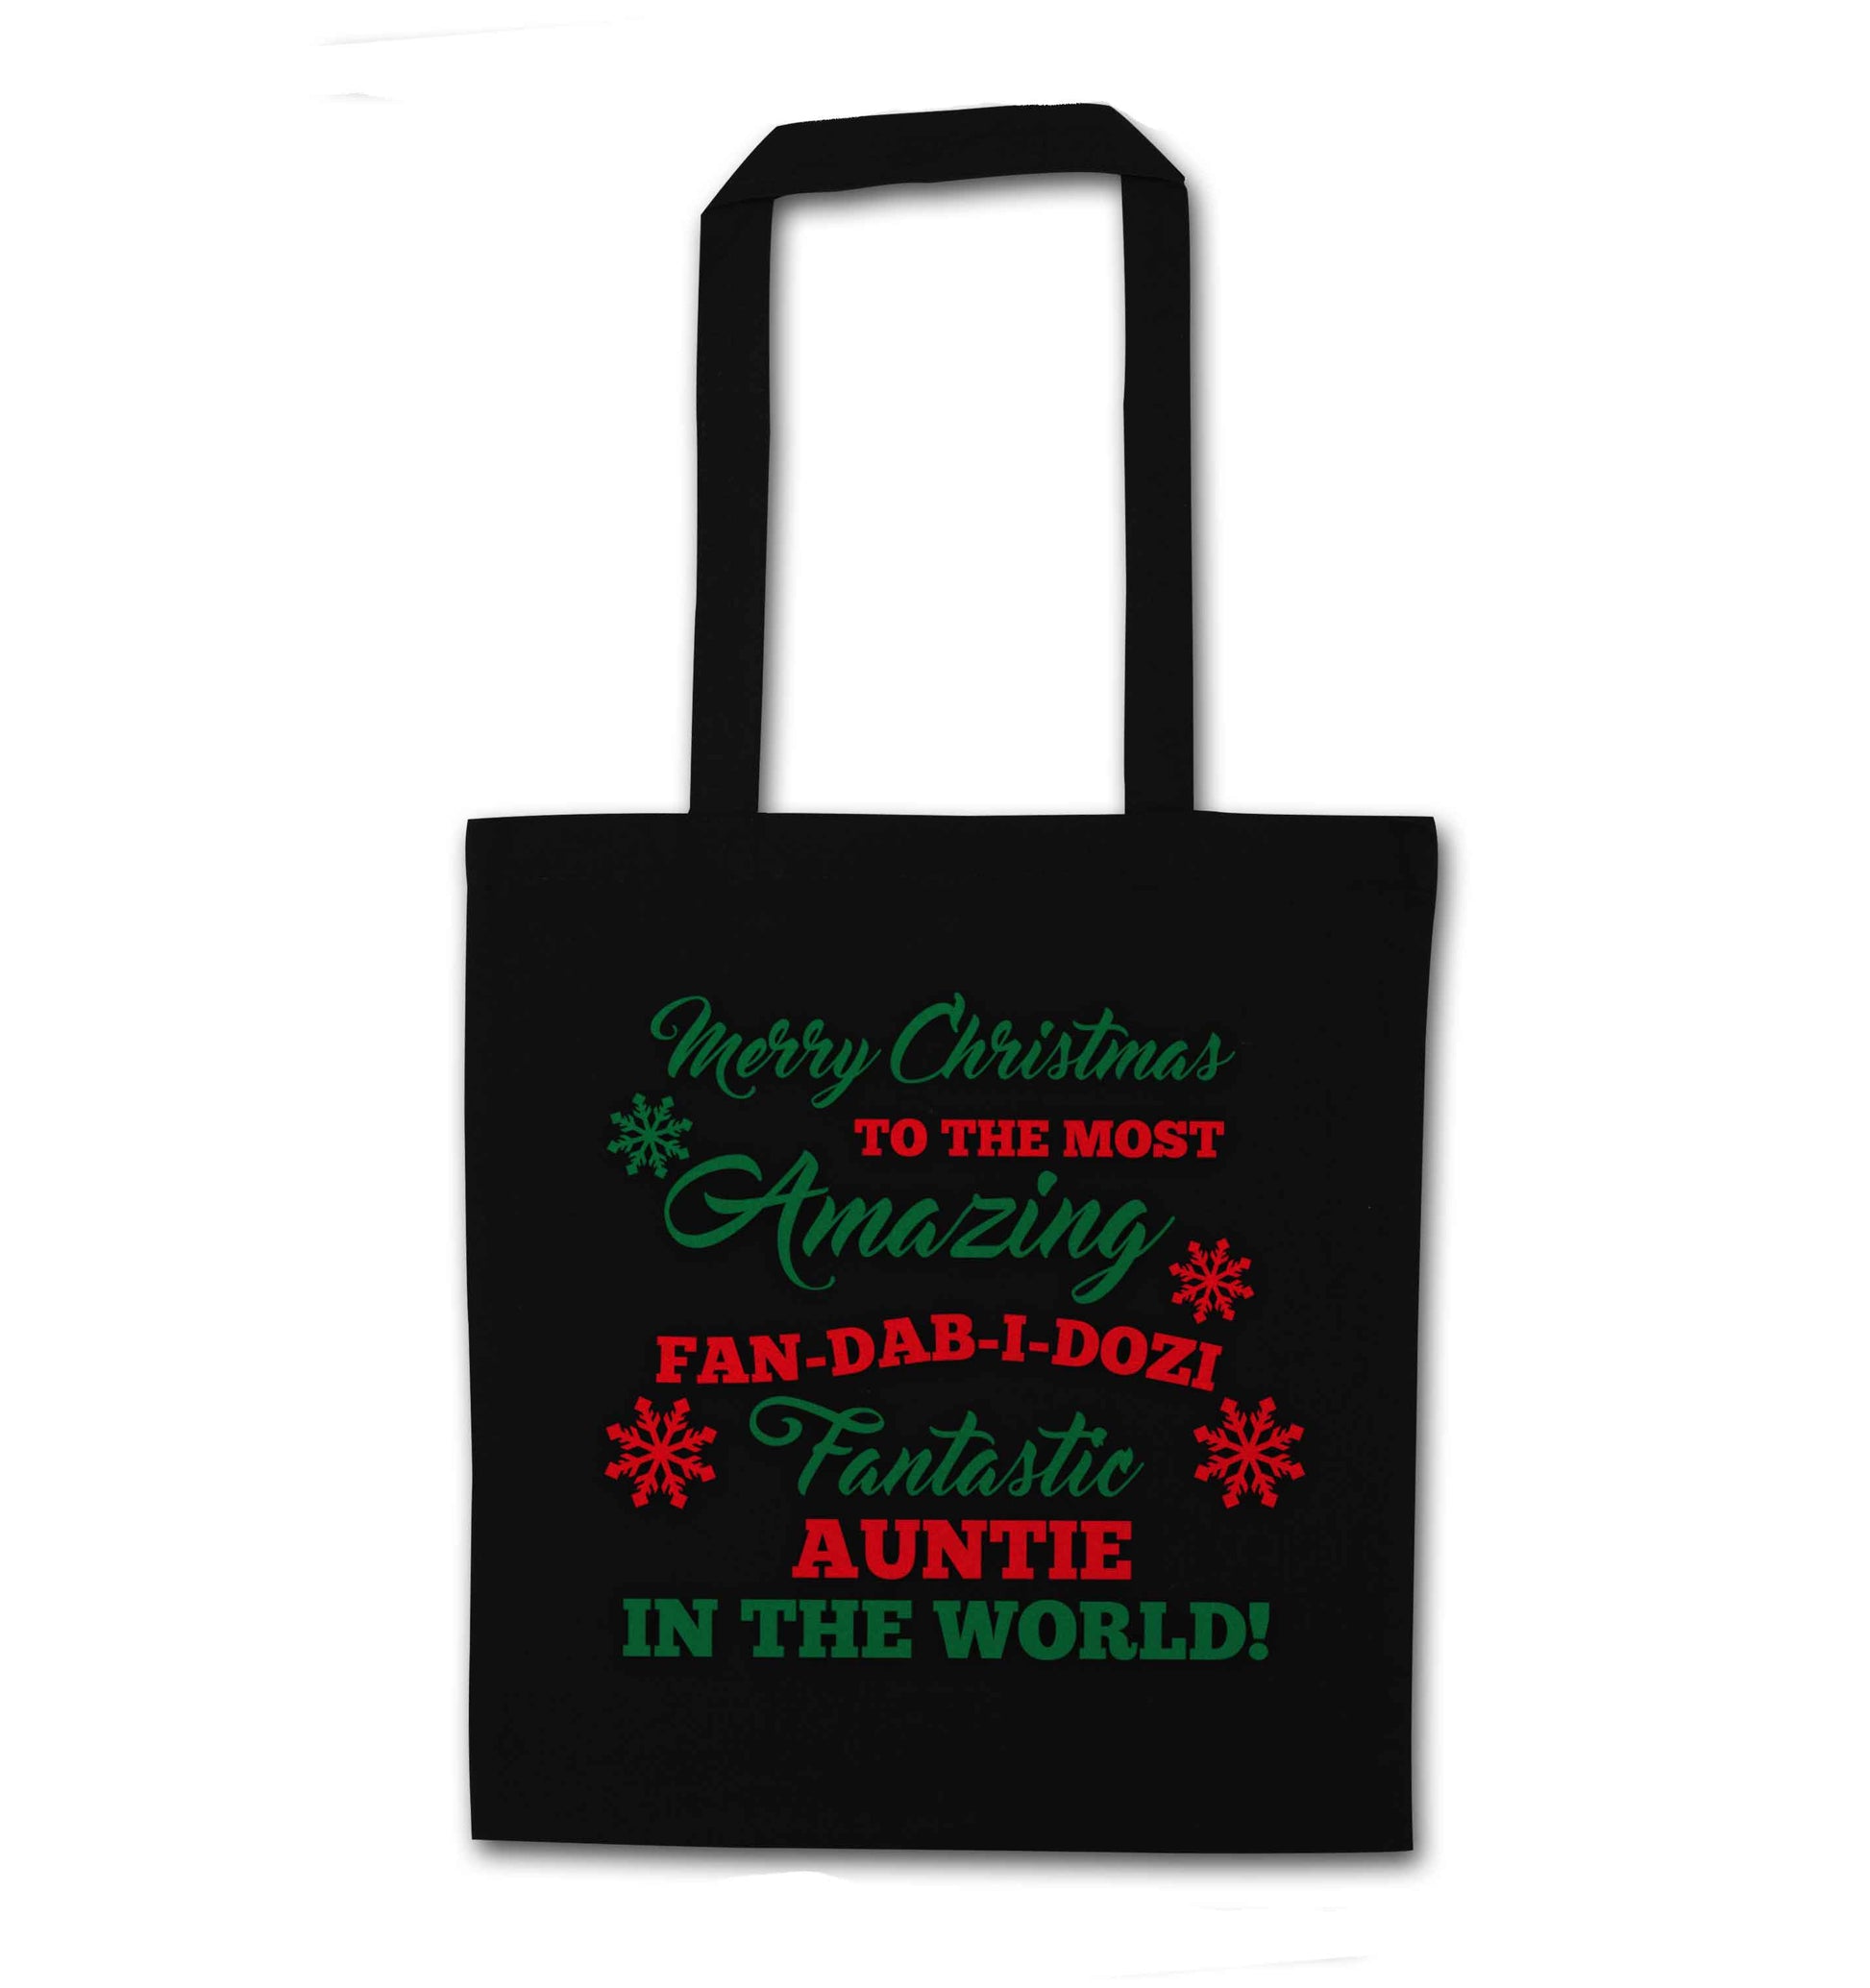 Merry Christmas to the most amazing fan-dab-i-dozi fantasic Auntie in the world black tote bag